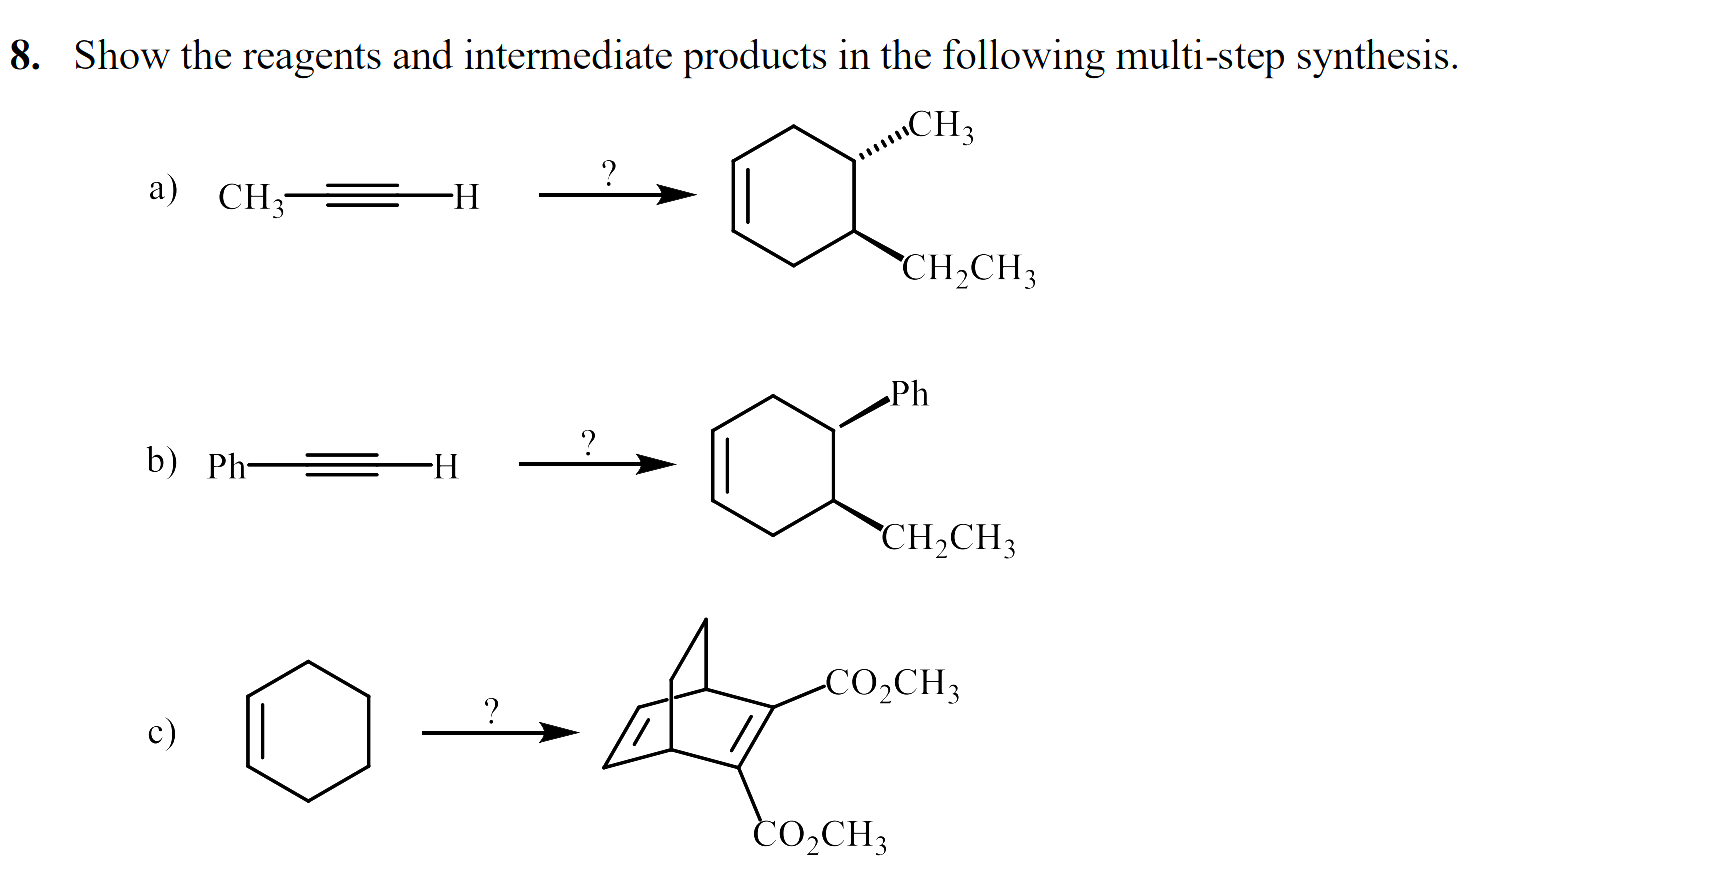 Show the reagents and intermediate products in the following multi-step synthesis.
CH3
а) CН —
-H
CH,CH3
Ph
?
b) Ph =
-H-
CH2CH3
CO,CH3
c)
CO,CH3
